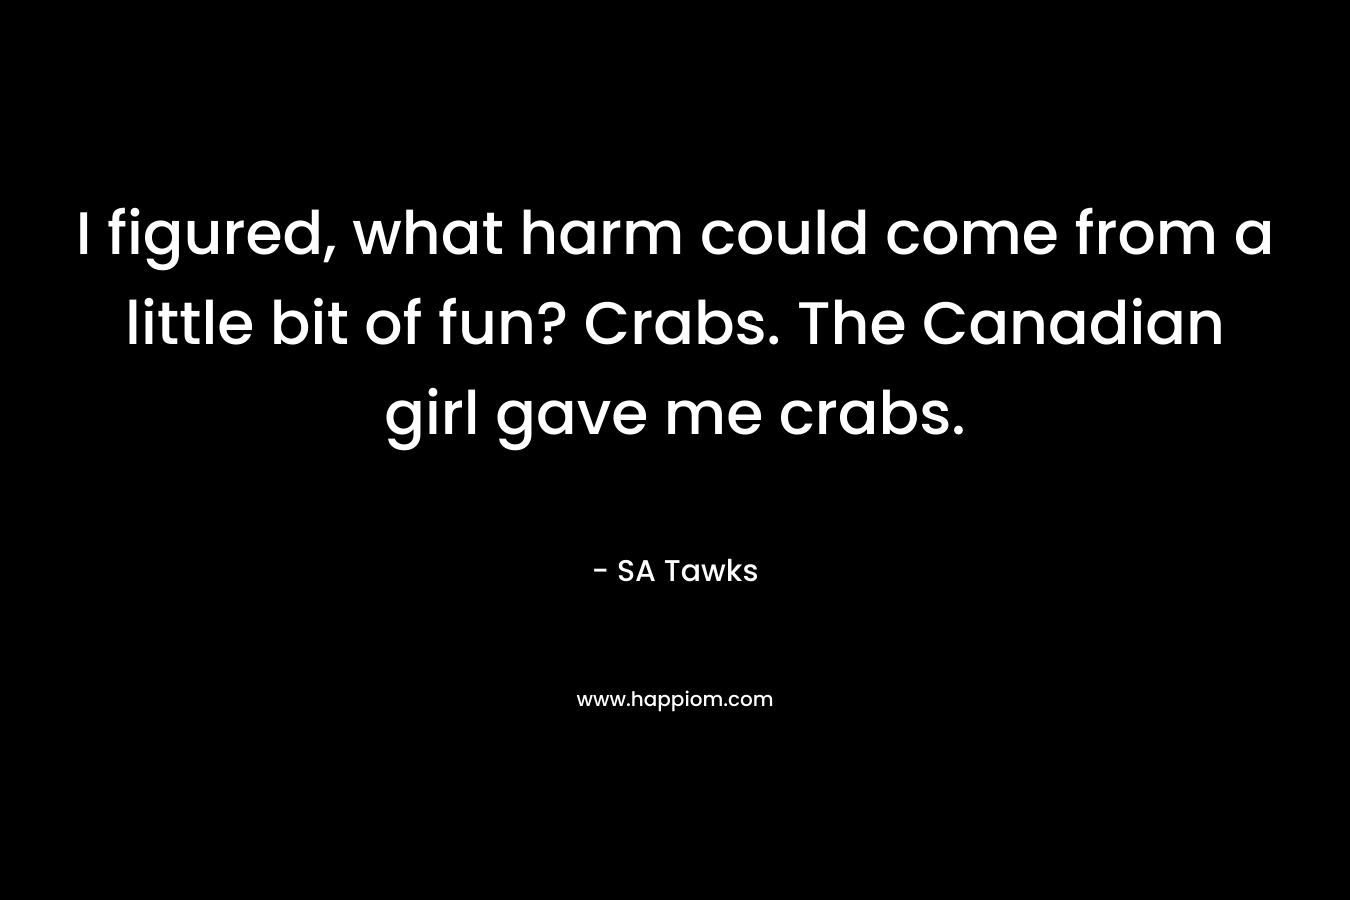 I figured, what harm could come from a little bit of fun? Crabs. The Canadian girl gave me crabs.